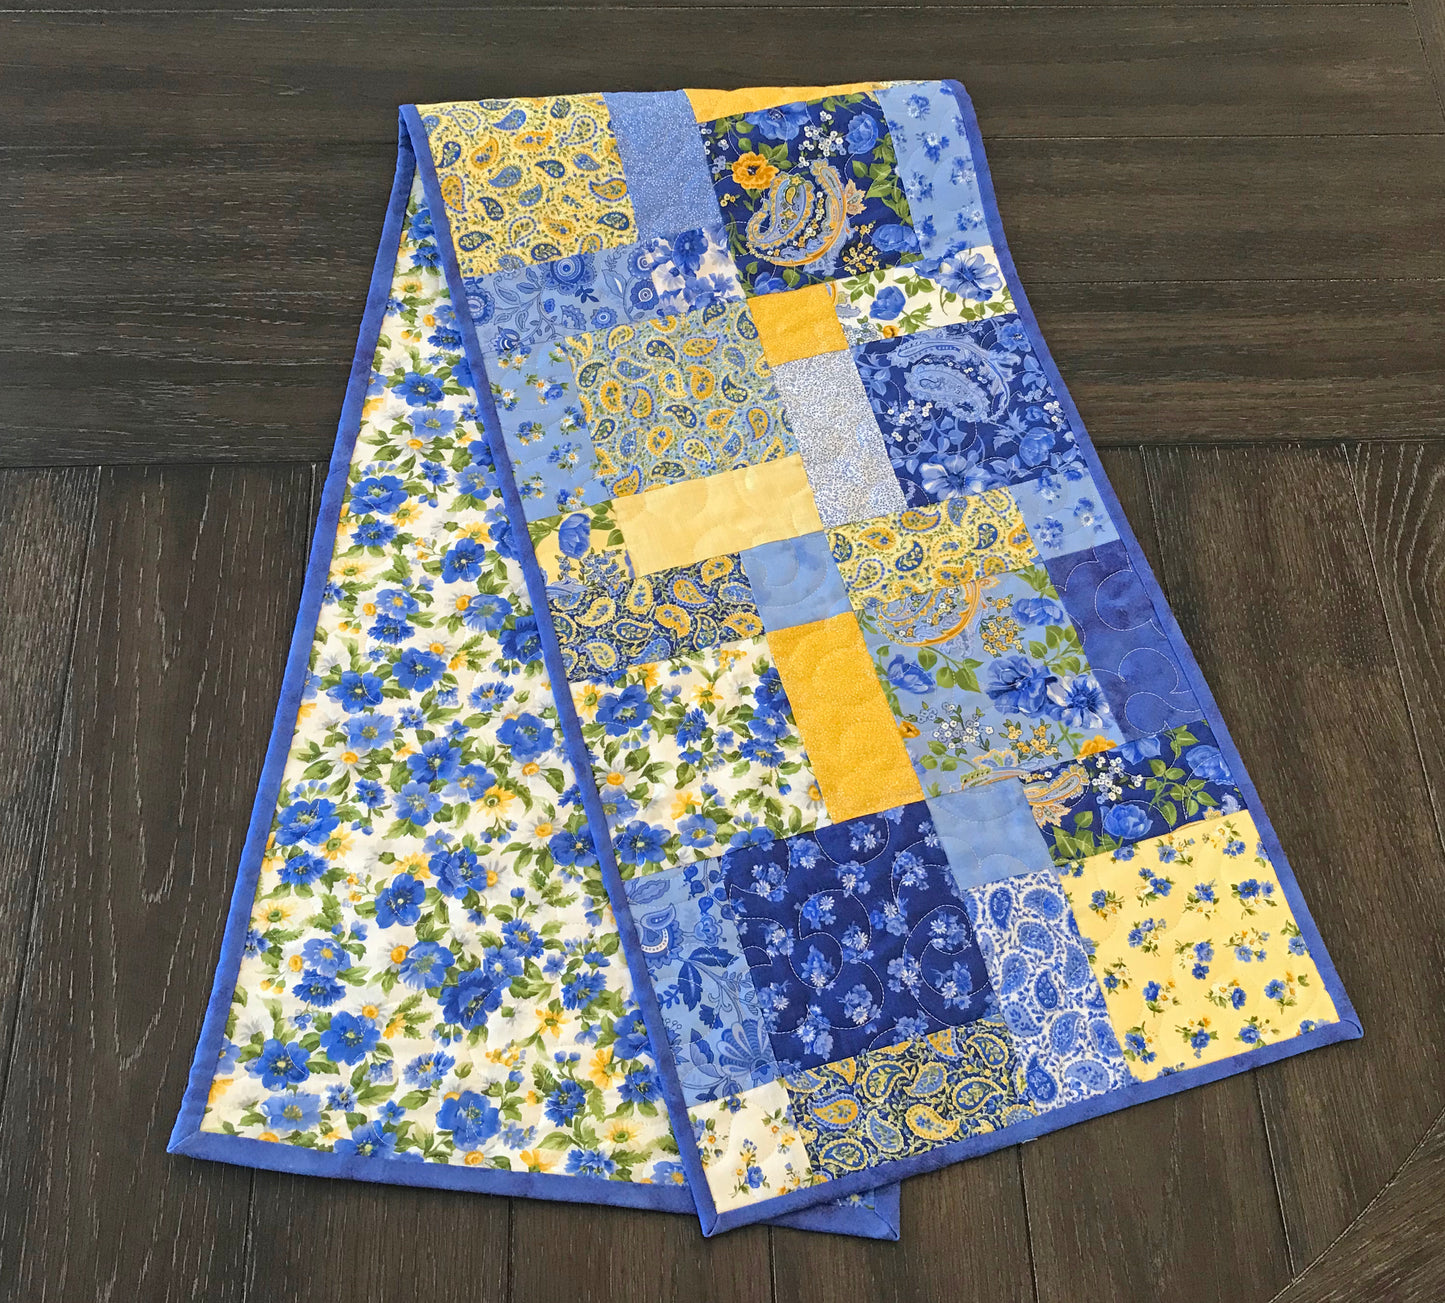 Charmingly Simple Table Runner and Table Topper Pattern for Charm Squares - Digital Pattern - Handmade Quilts, Digital Patterns, and Home Décor items online - Cuddle Cat Quiltworks